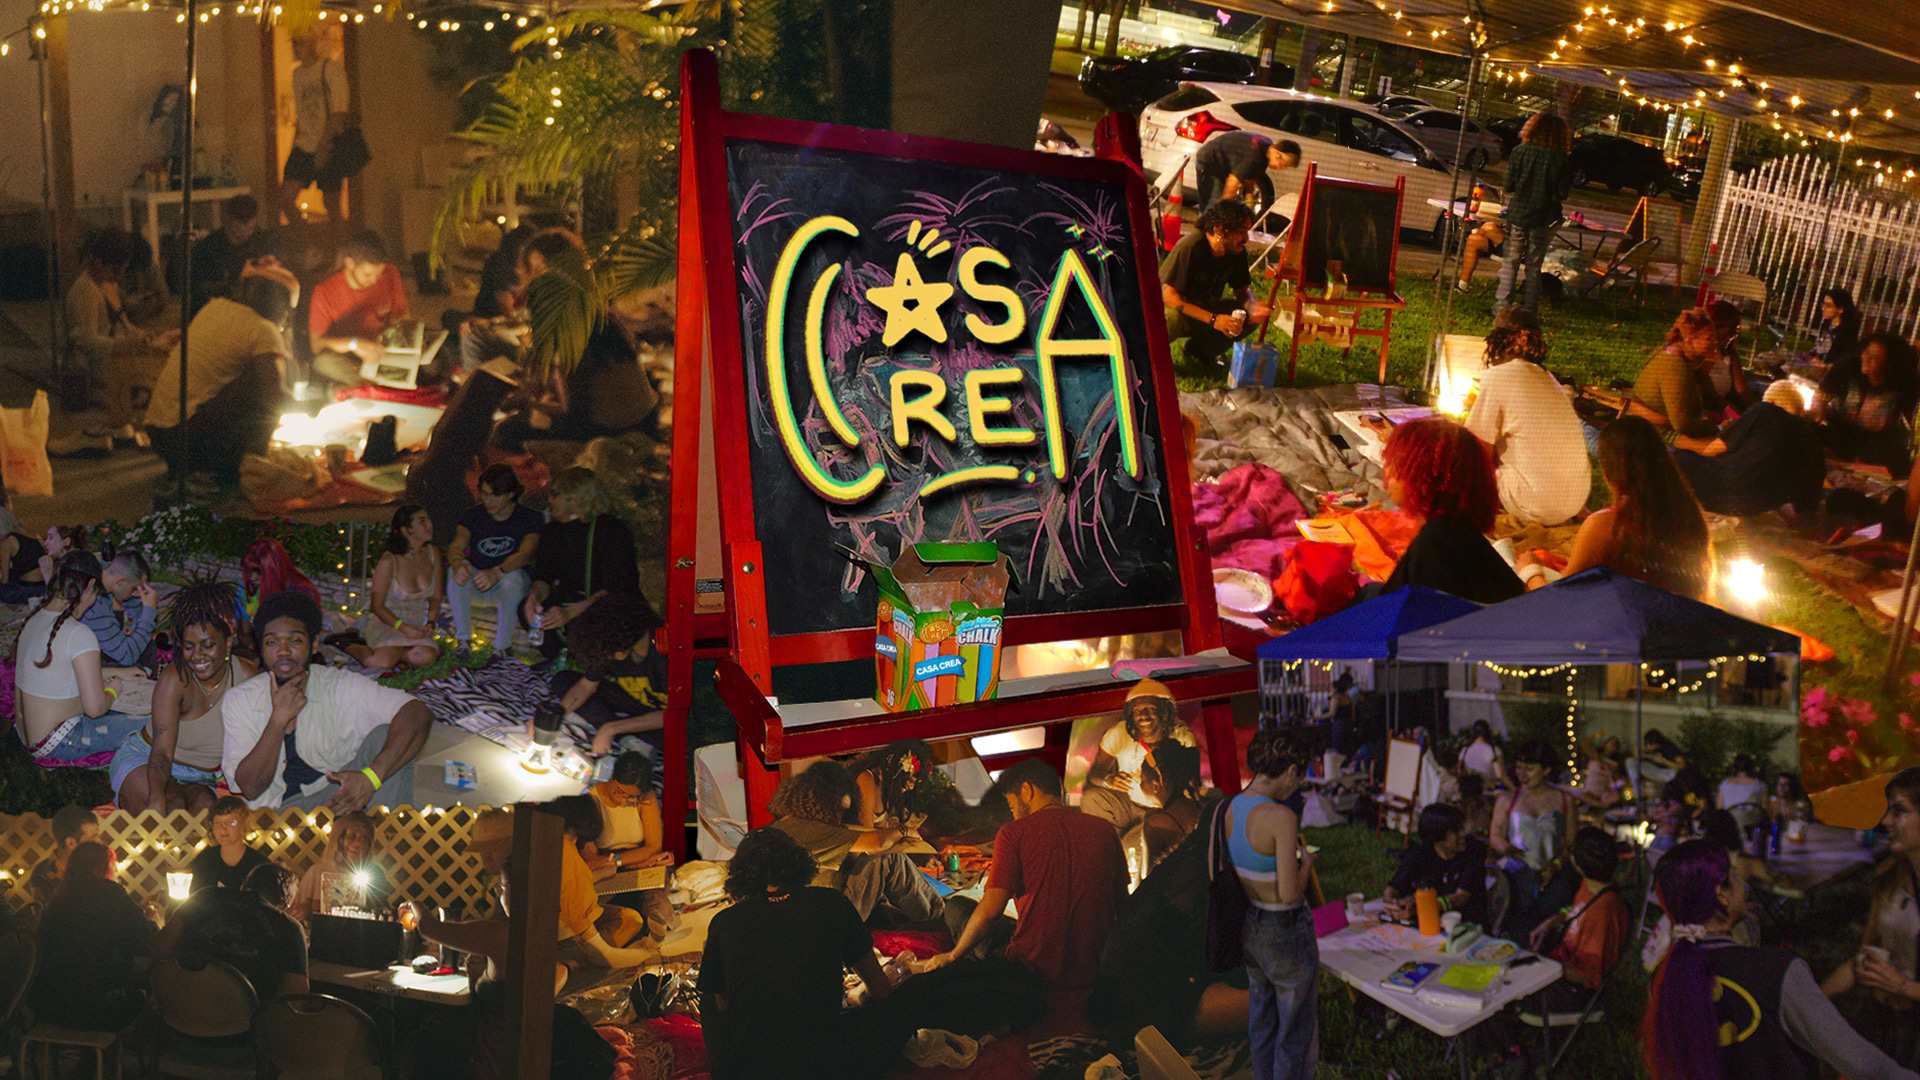 Photo collage of people seated participating in art making activities. In the center, a sign reads, "Casa Crea."